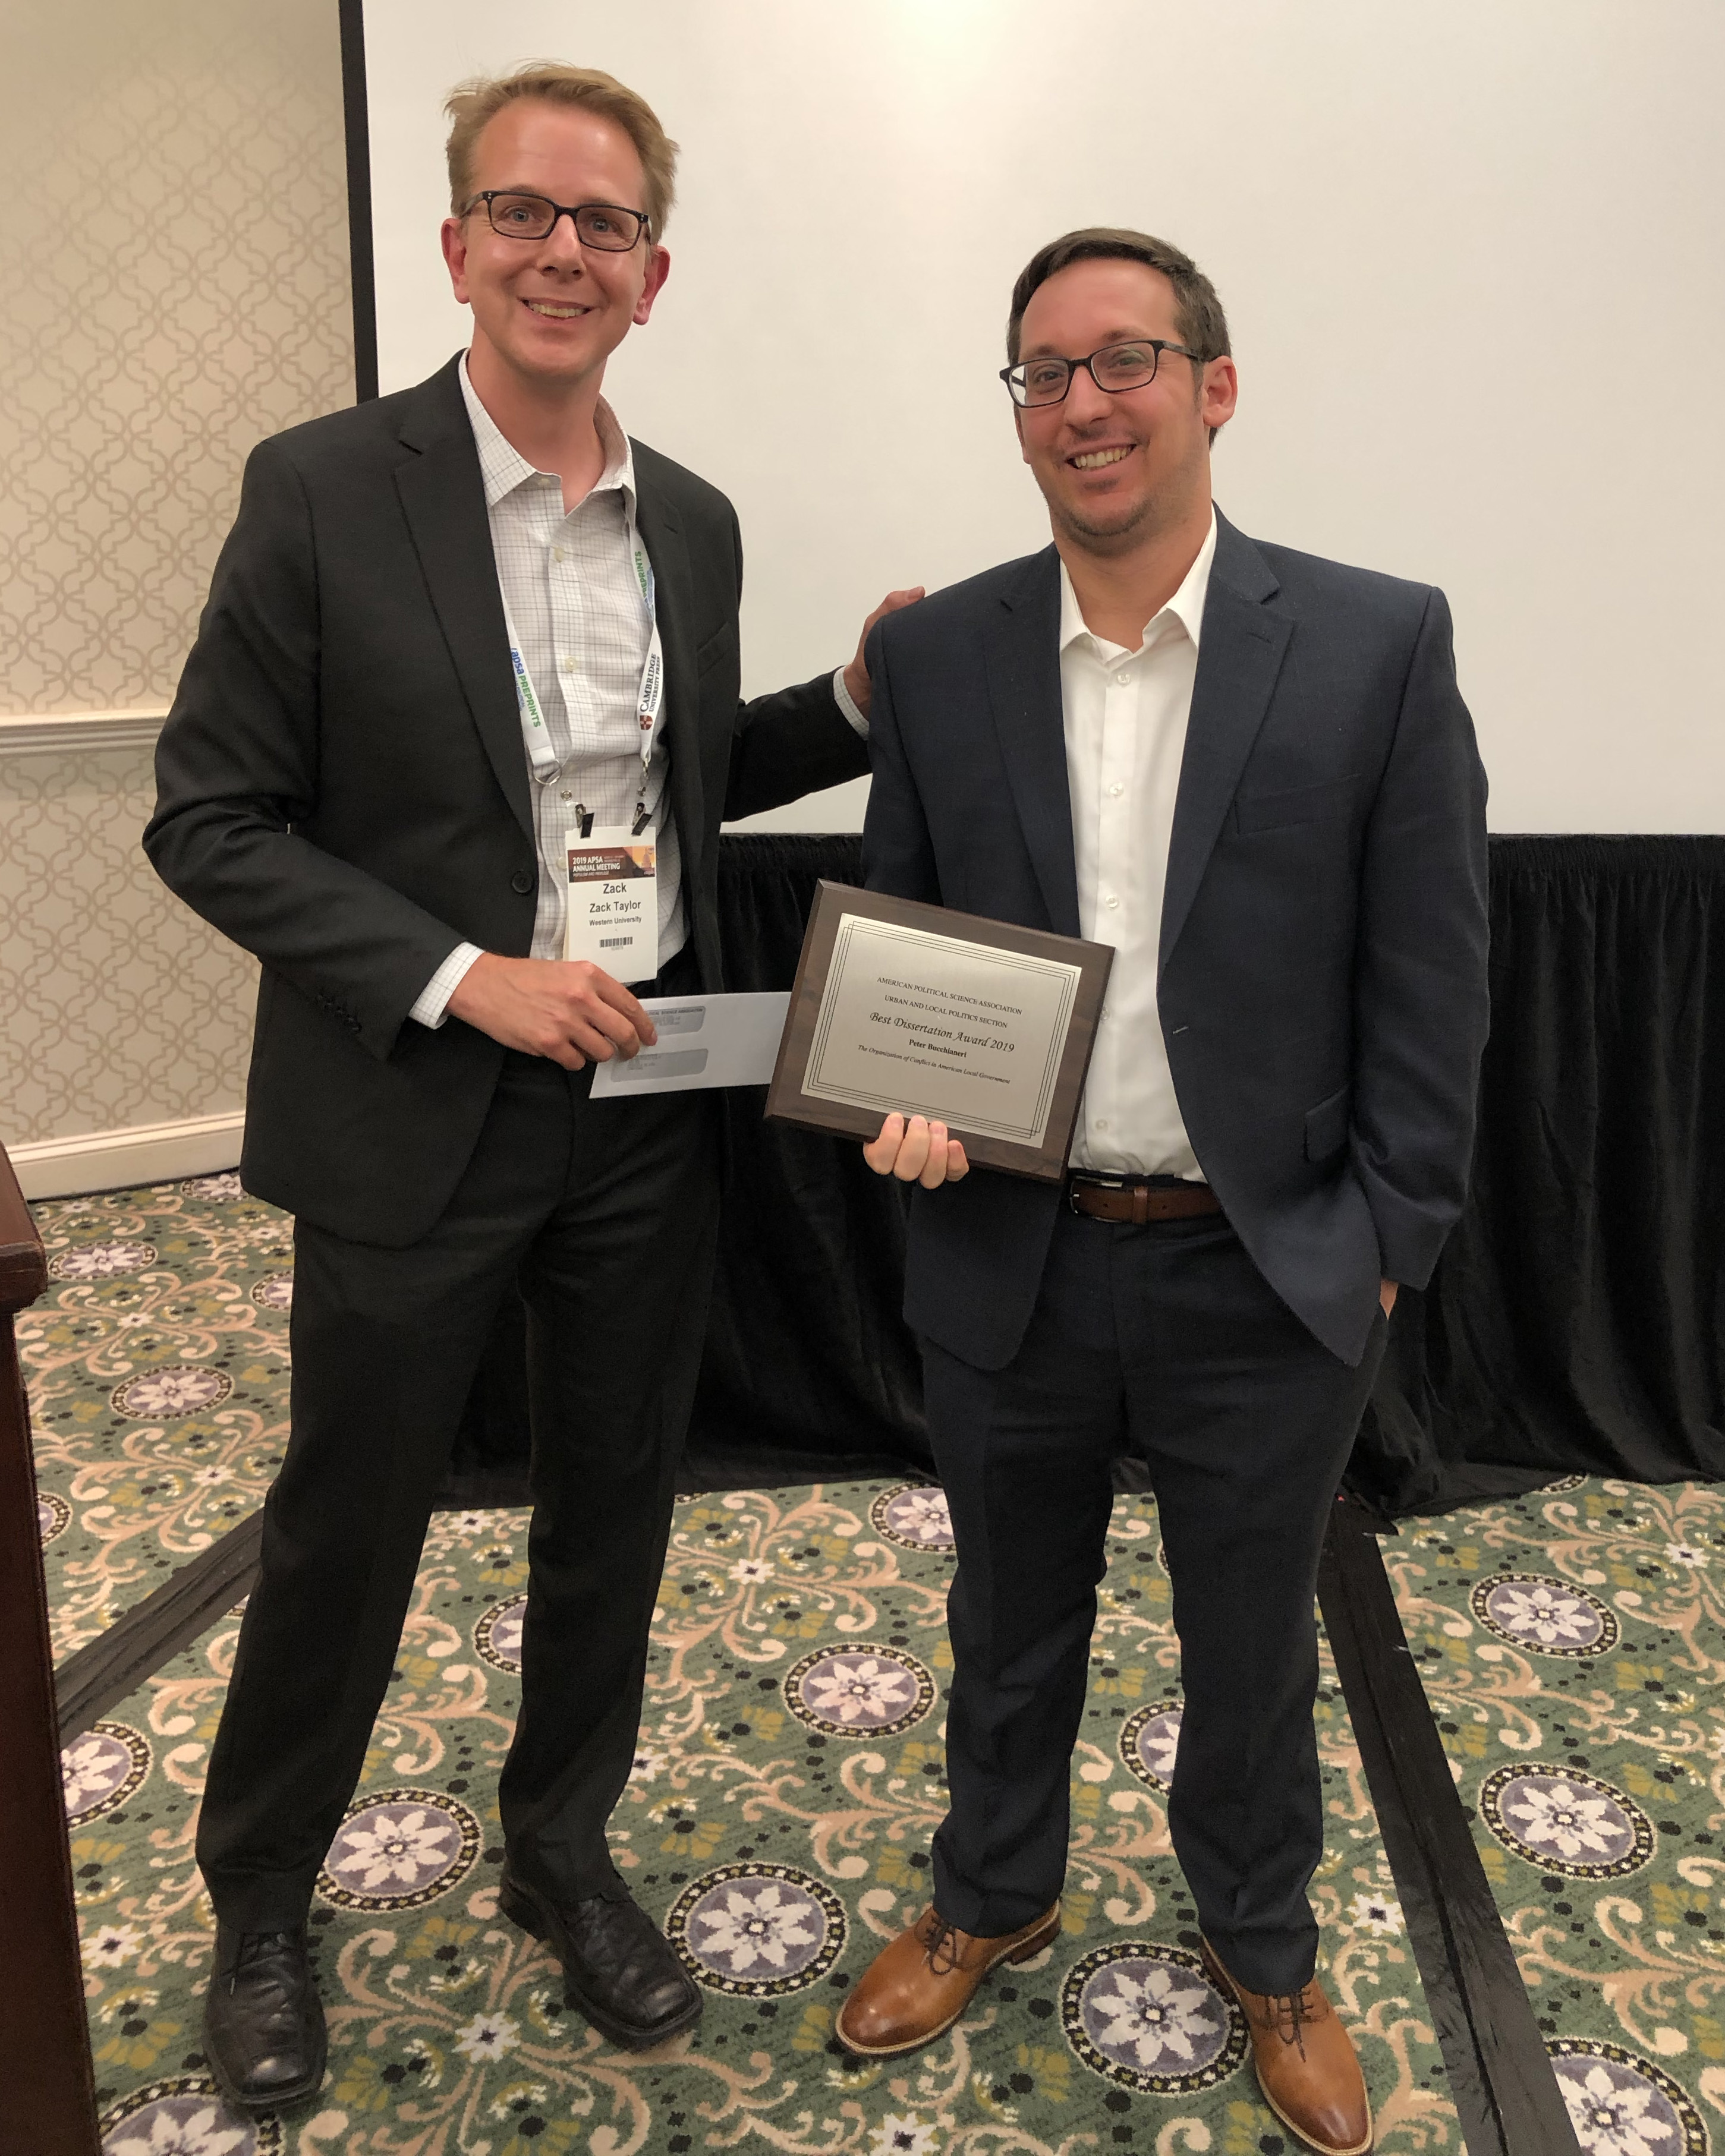 Zack Taylor presents the Best Dissertation Award to Peter Bucchanieri at the 2019 APSA conference.